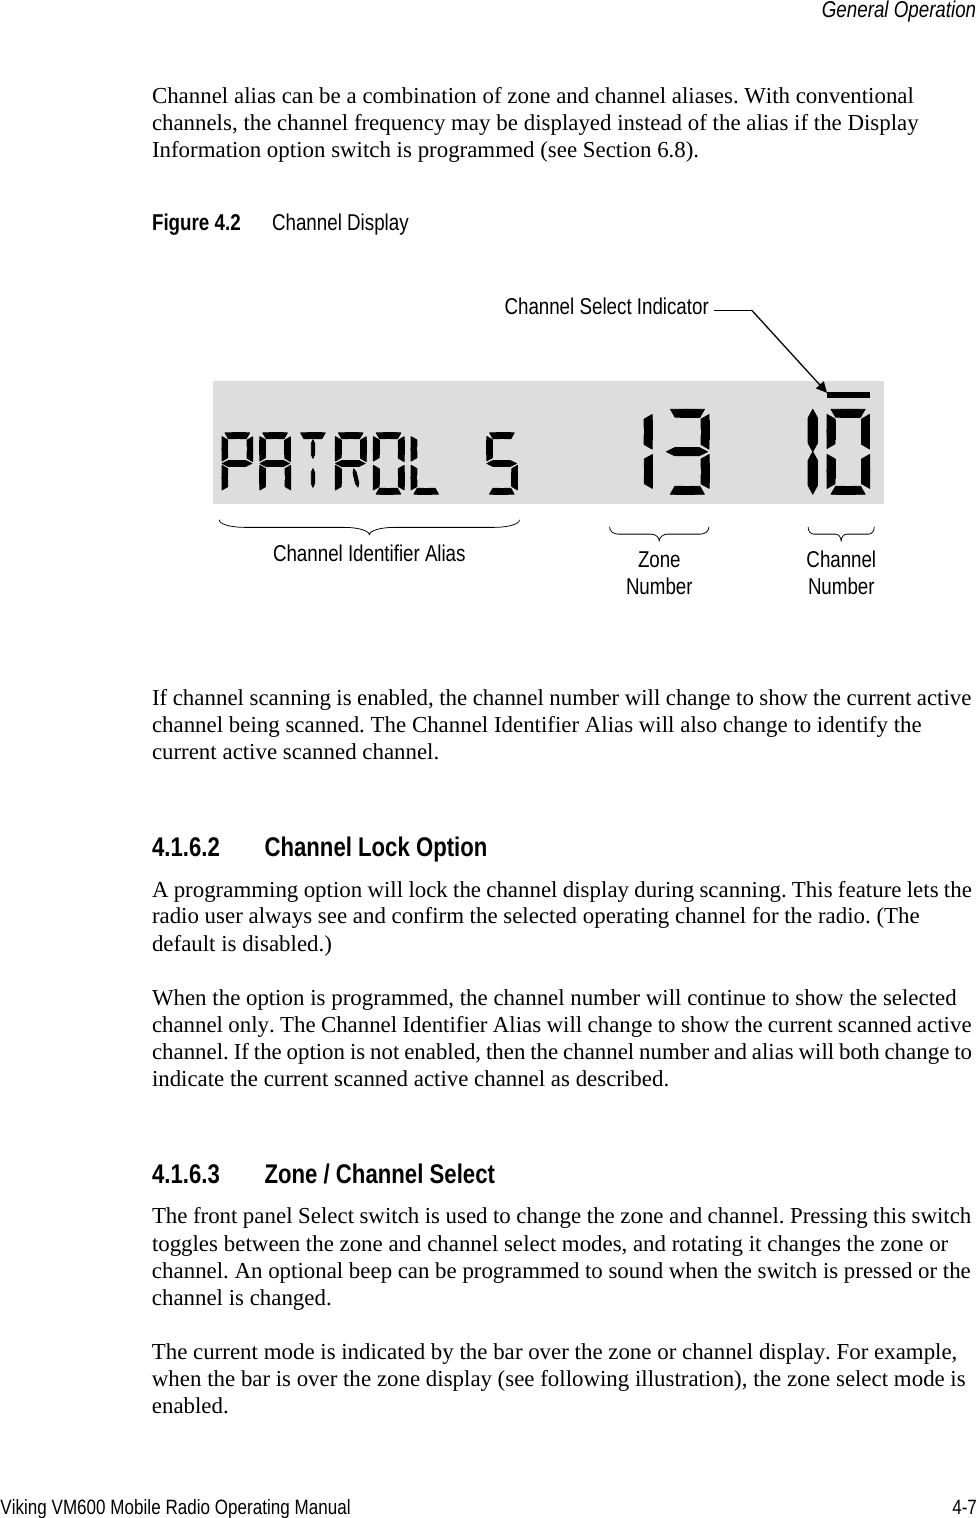 Viking VM600 Mobile Radio Operating Manual 4-7General OperationChannel alias can be a combination of zone and channel aliases. With conventional channels, the channel frequency may be displayed instead of the alias if the Display Information option switch is programmed (see Section 6.8).Figure 4.2 Channel DisplayIf channel scanning is enabled, the channel number will change to show the current active channel being scanned. The Channel Identifier Alias will also change to identify the current active scanned channel.4.1.6.2 Channel Lock OptionA programming option will lock the channel display during scanning. This feature lets the radio user always see and confirm the selected operating channel for the radio. (The default is disabled.)When the option is programmed, the channel number will continue to show the selected channel only. The Channel Identifier Alias will change to show the current scanned active channel. If the option is not enabled, then the channel number and alias will both change to indicate the current scanned active channel as described.4.1.6.3 Zone / Channel Select The front panel Select switch is used to change the zone and channel. Pressing this switch toggles between the zone and channel select modes, and rotating it changes the zone or channel. An optional beep can be programmed to sound when the switch is pressed or the channel is changed.The current mode is indicated by the bar over the zone or channel display. For example, when the bar is over the zone display (see following illustration), the zone select mode is enabled.ZoneNumber ChannelNumberChannel Select IndicatorChannel Identifier AliasDraft 4/29/2014